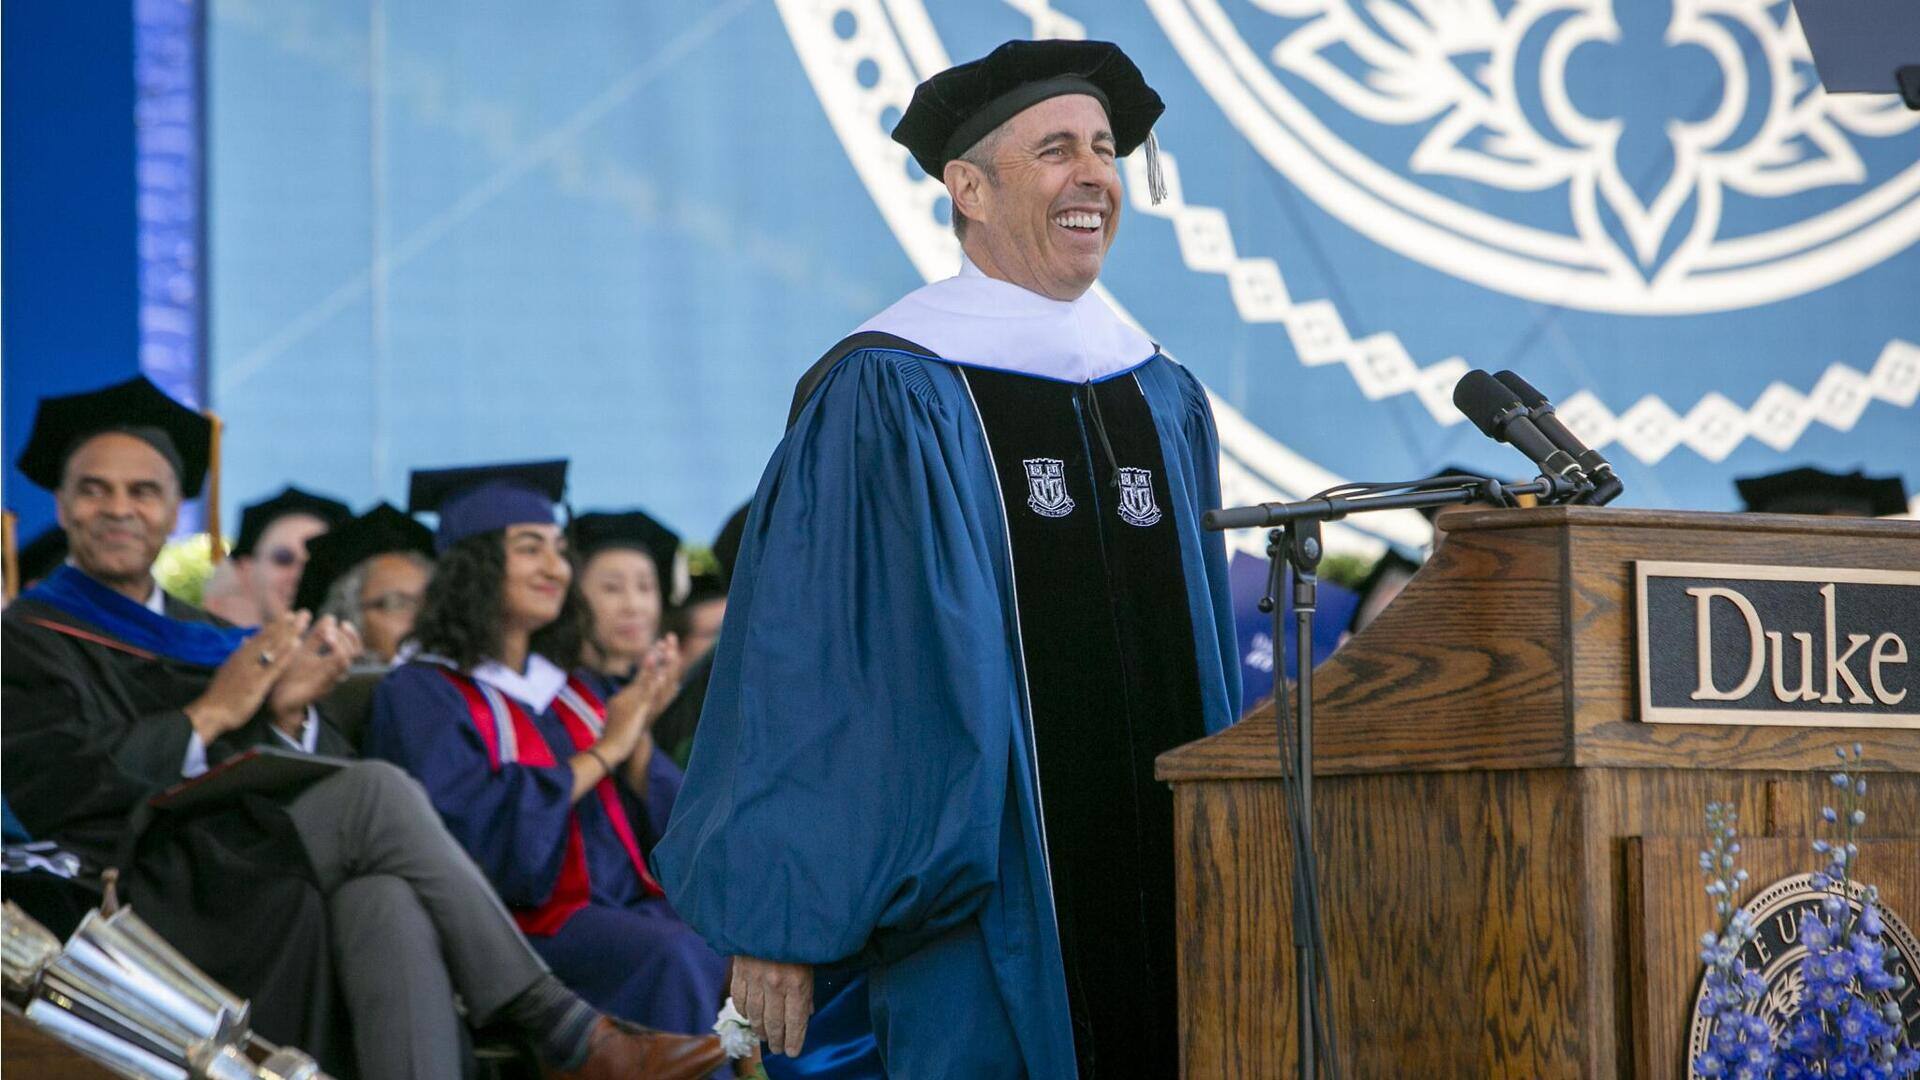 Why Duke University students staged walkout during Jerry Seinfeld's speech